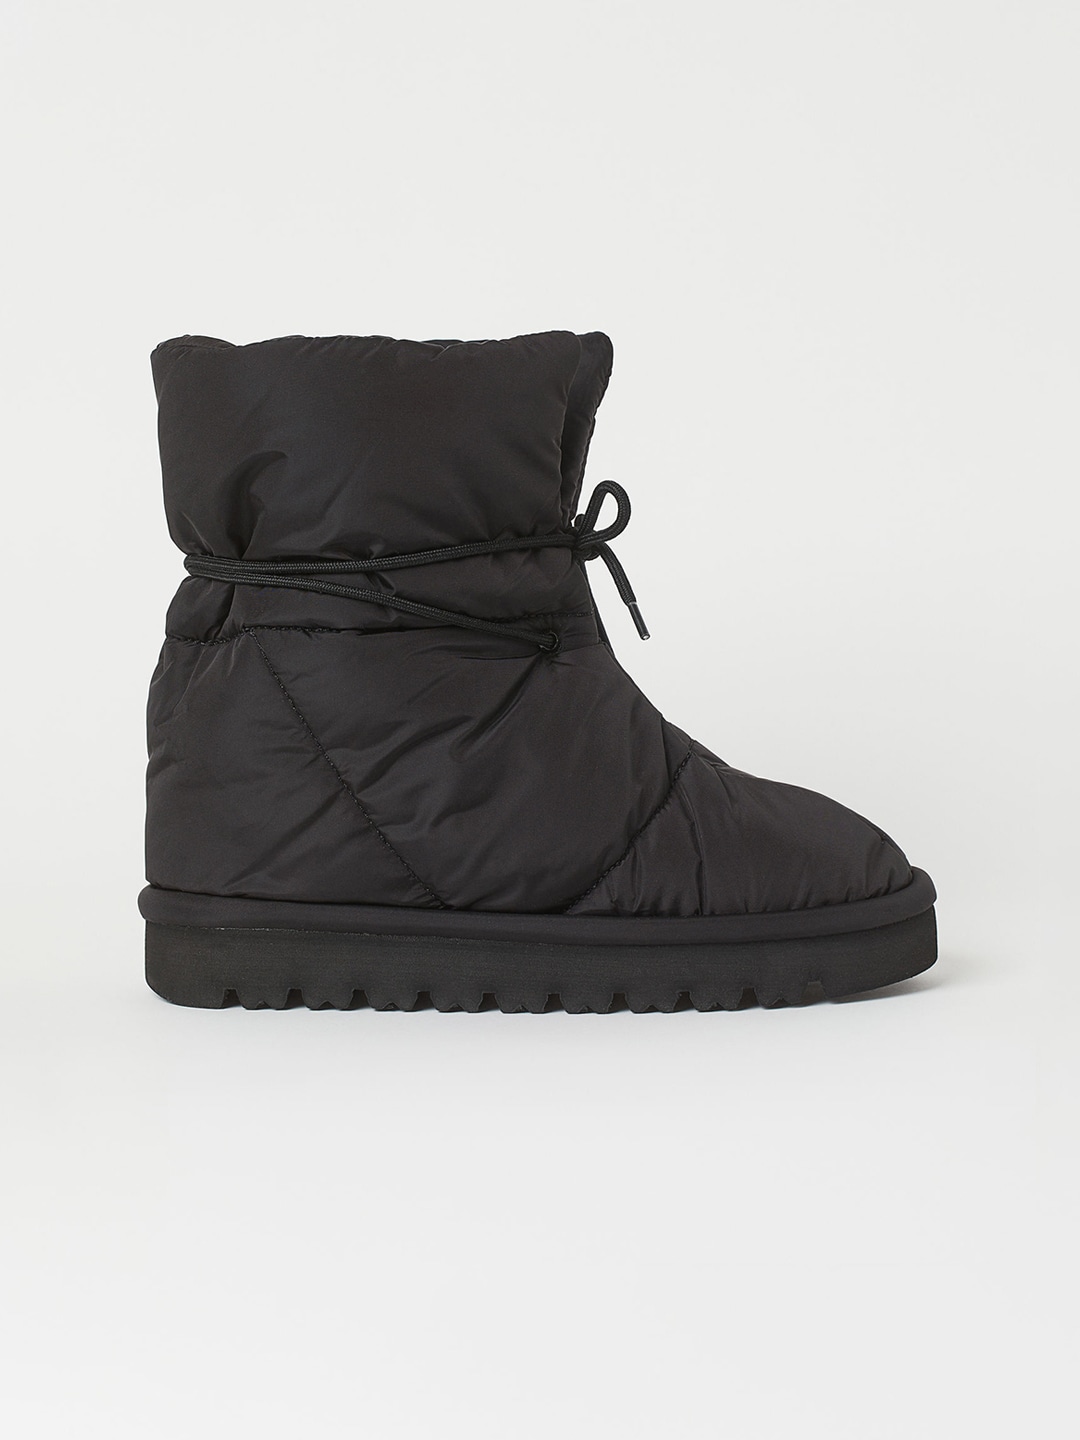 H&M Women Black Solid Mid-Top Ankle-Laced Nylon Boots Price in India